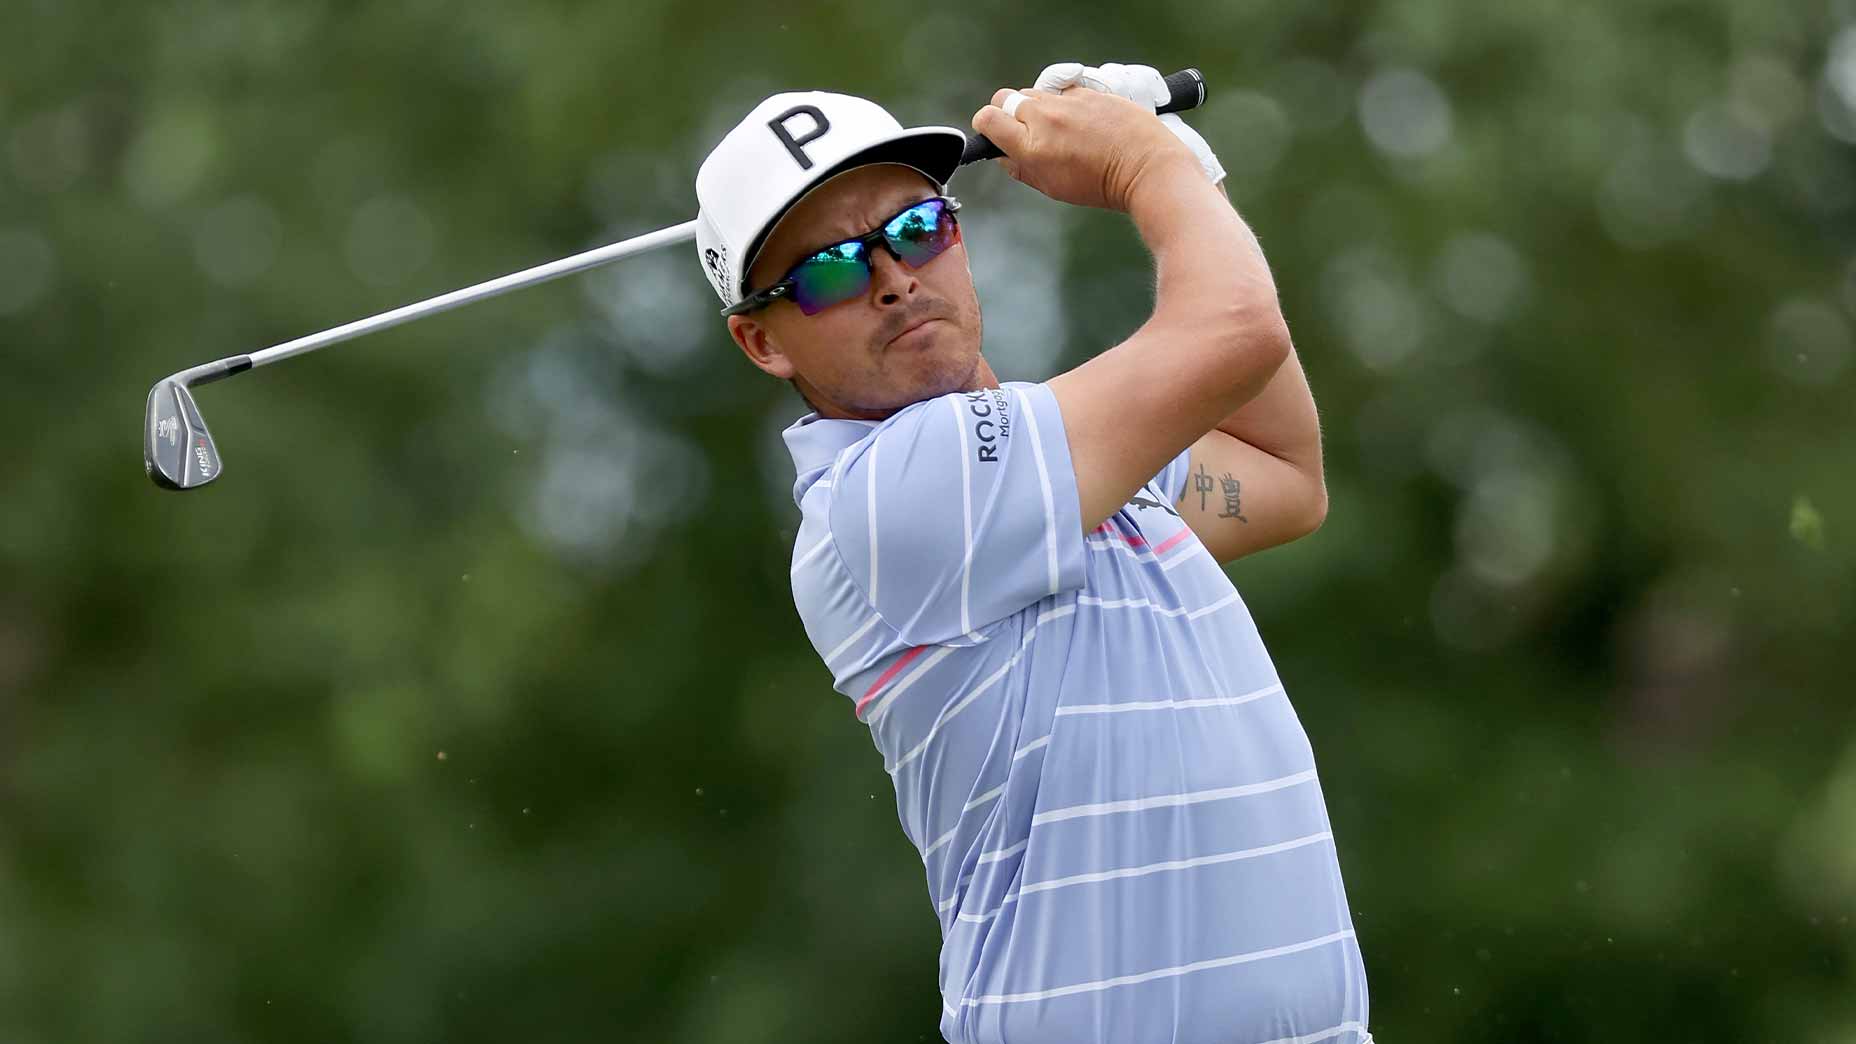 Wyndham Championship expert picks Who an expert is picking to win